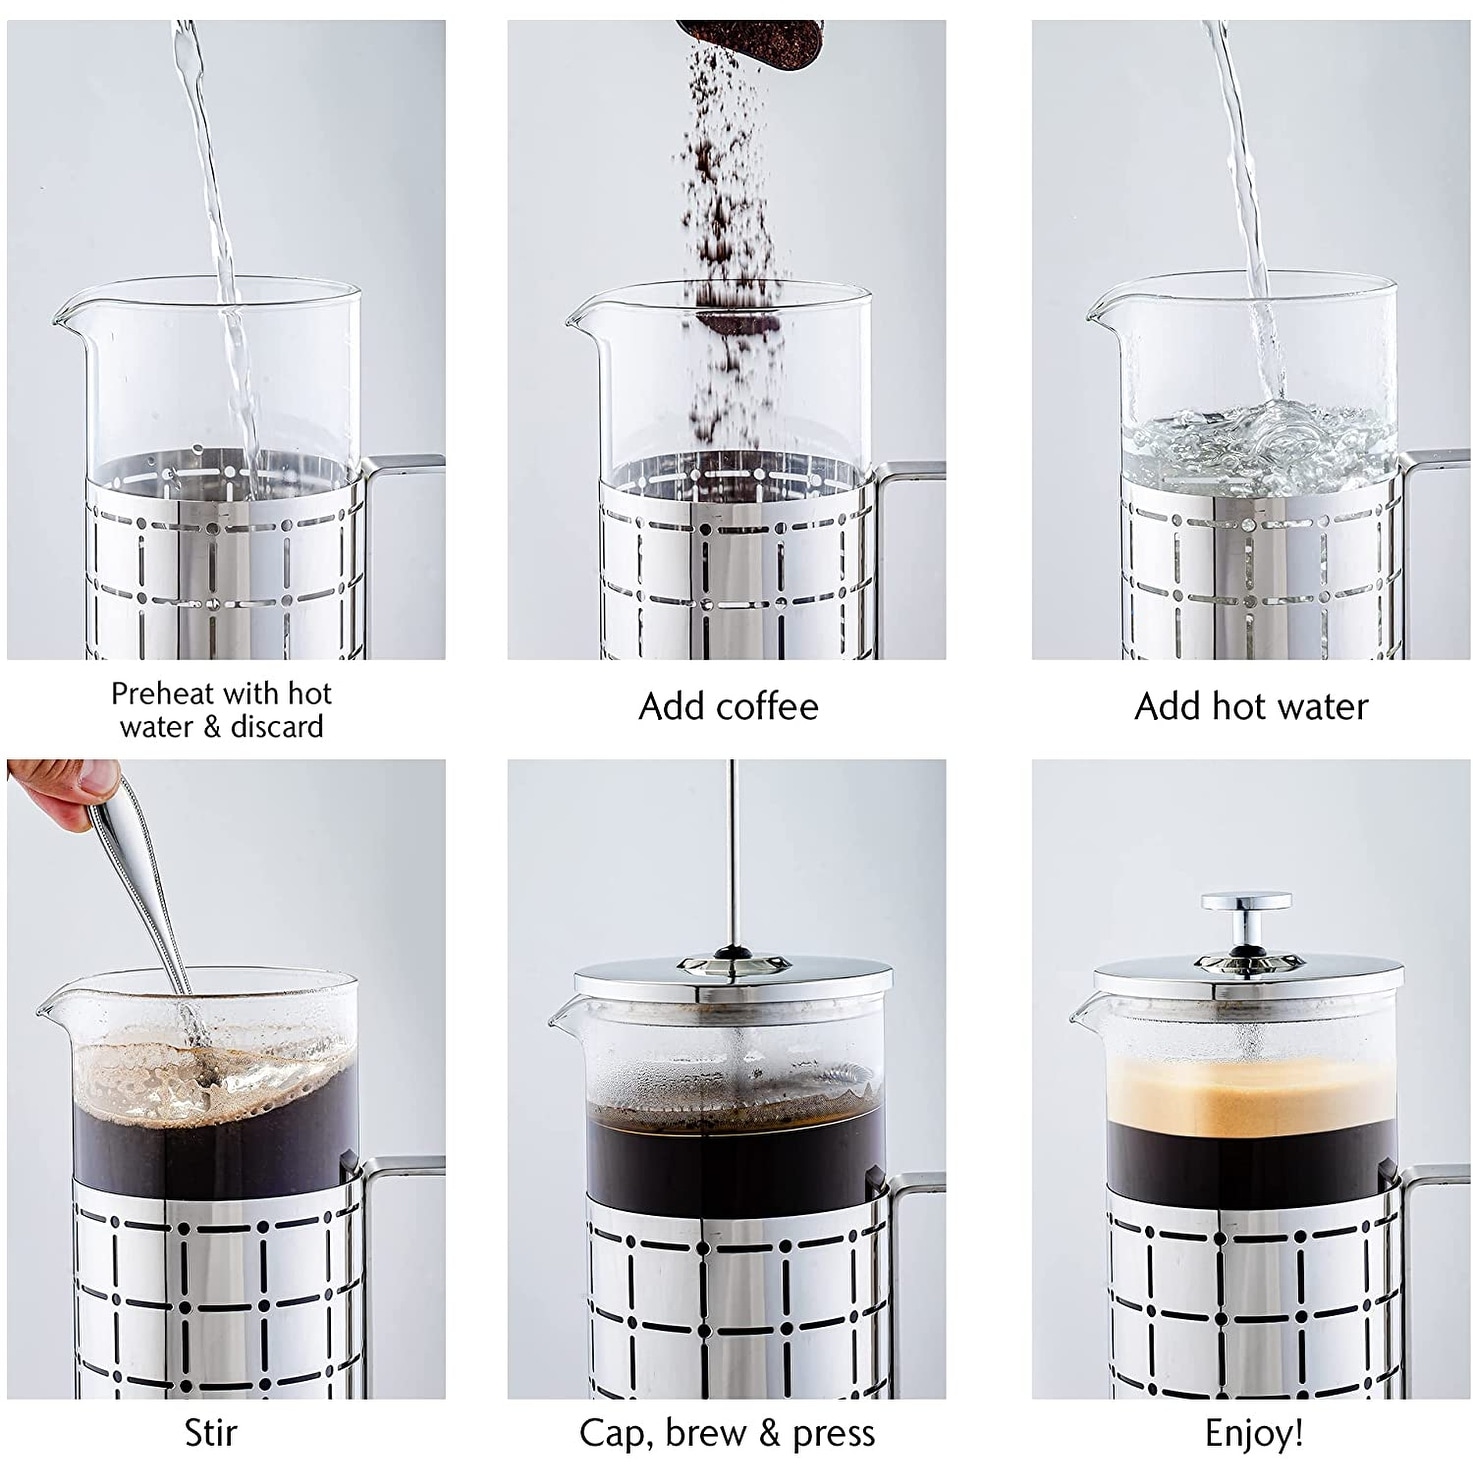 https://ak1.ostkcdn.com/images/products/is/images/direct/8955f8d407df1eaa8a0cd964b677a93fb8fc54e1/Ovente-French-Press-34-Ounce-1-Liter-Coffee-%26-Tea-Maker%2C-4-Level-Stainless-Steel-Filter-System%2C-Silver-FSS34P.jpg